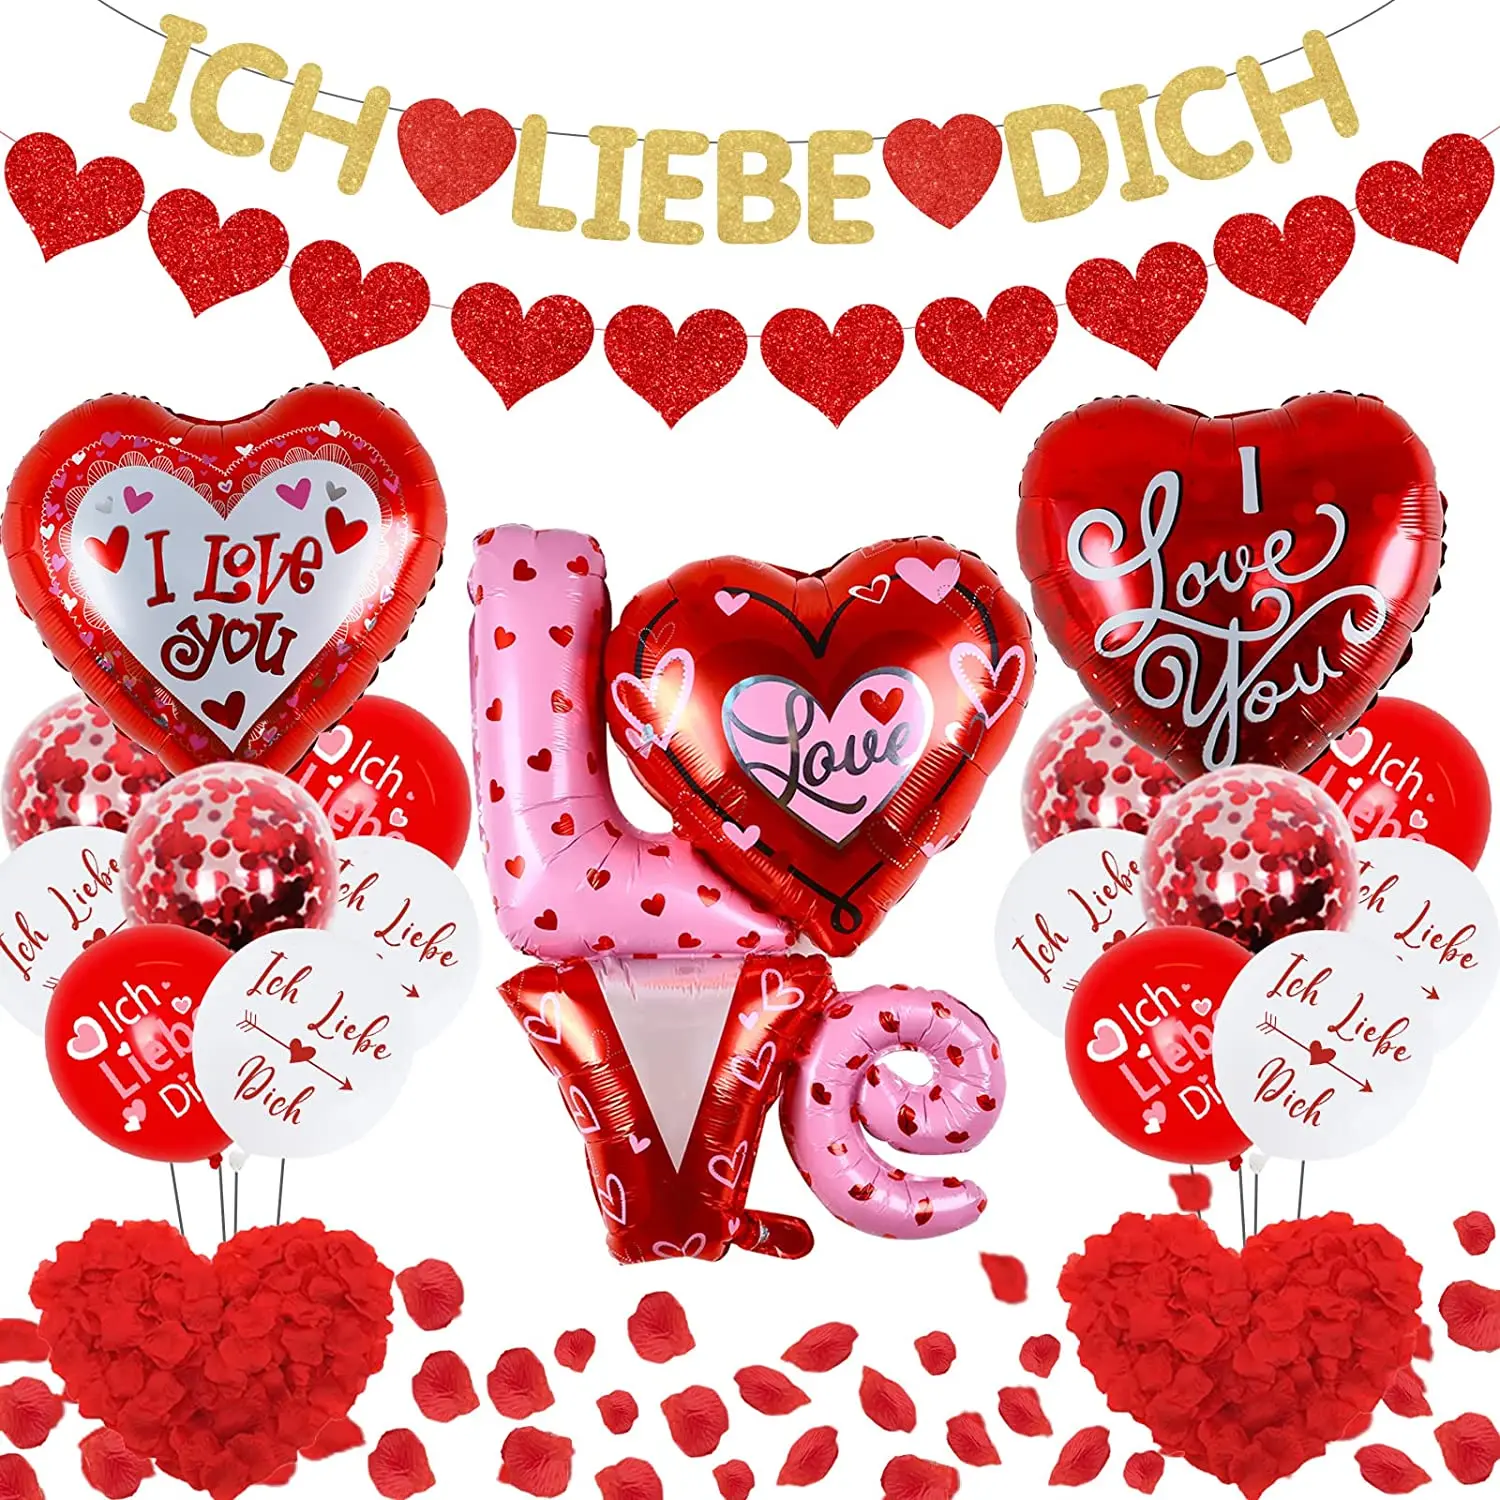 

Funmemoir ICH LIEBE DICH Wedding Decoration Red Love Balloons Heart Banner Rose Petal for Proposal Engagement Valentine's Day